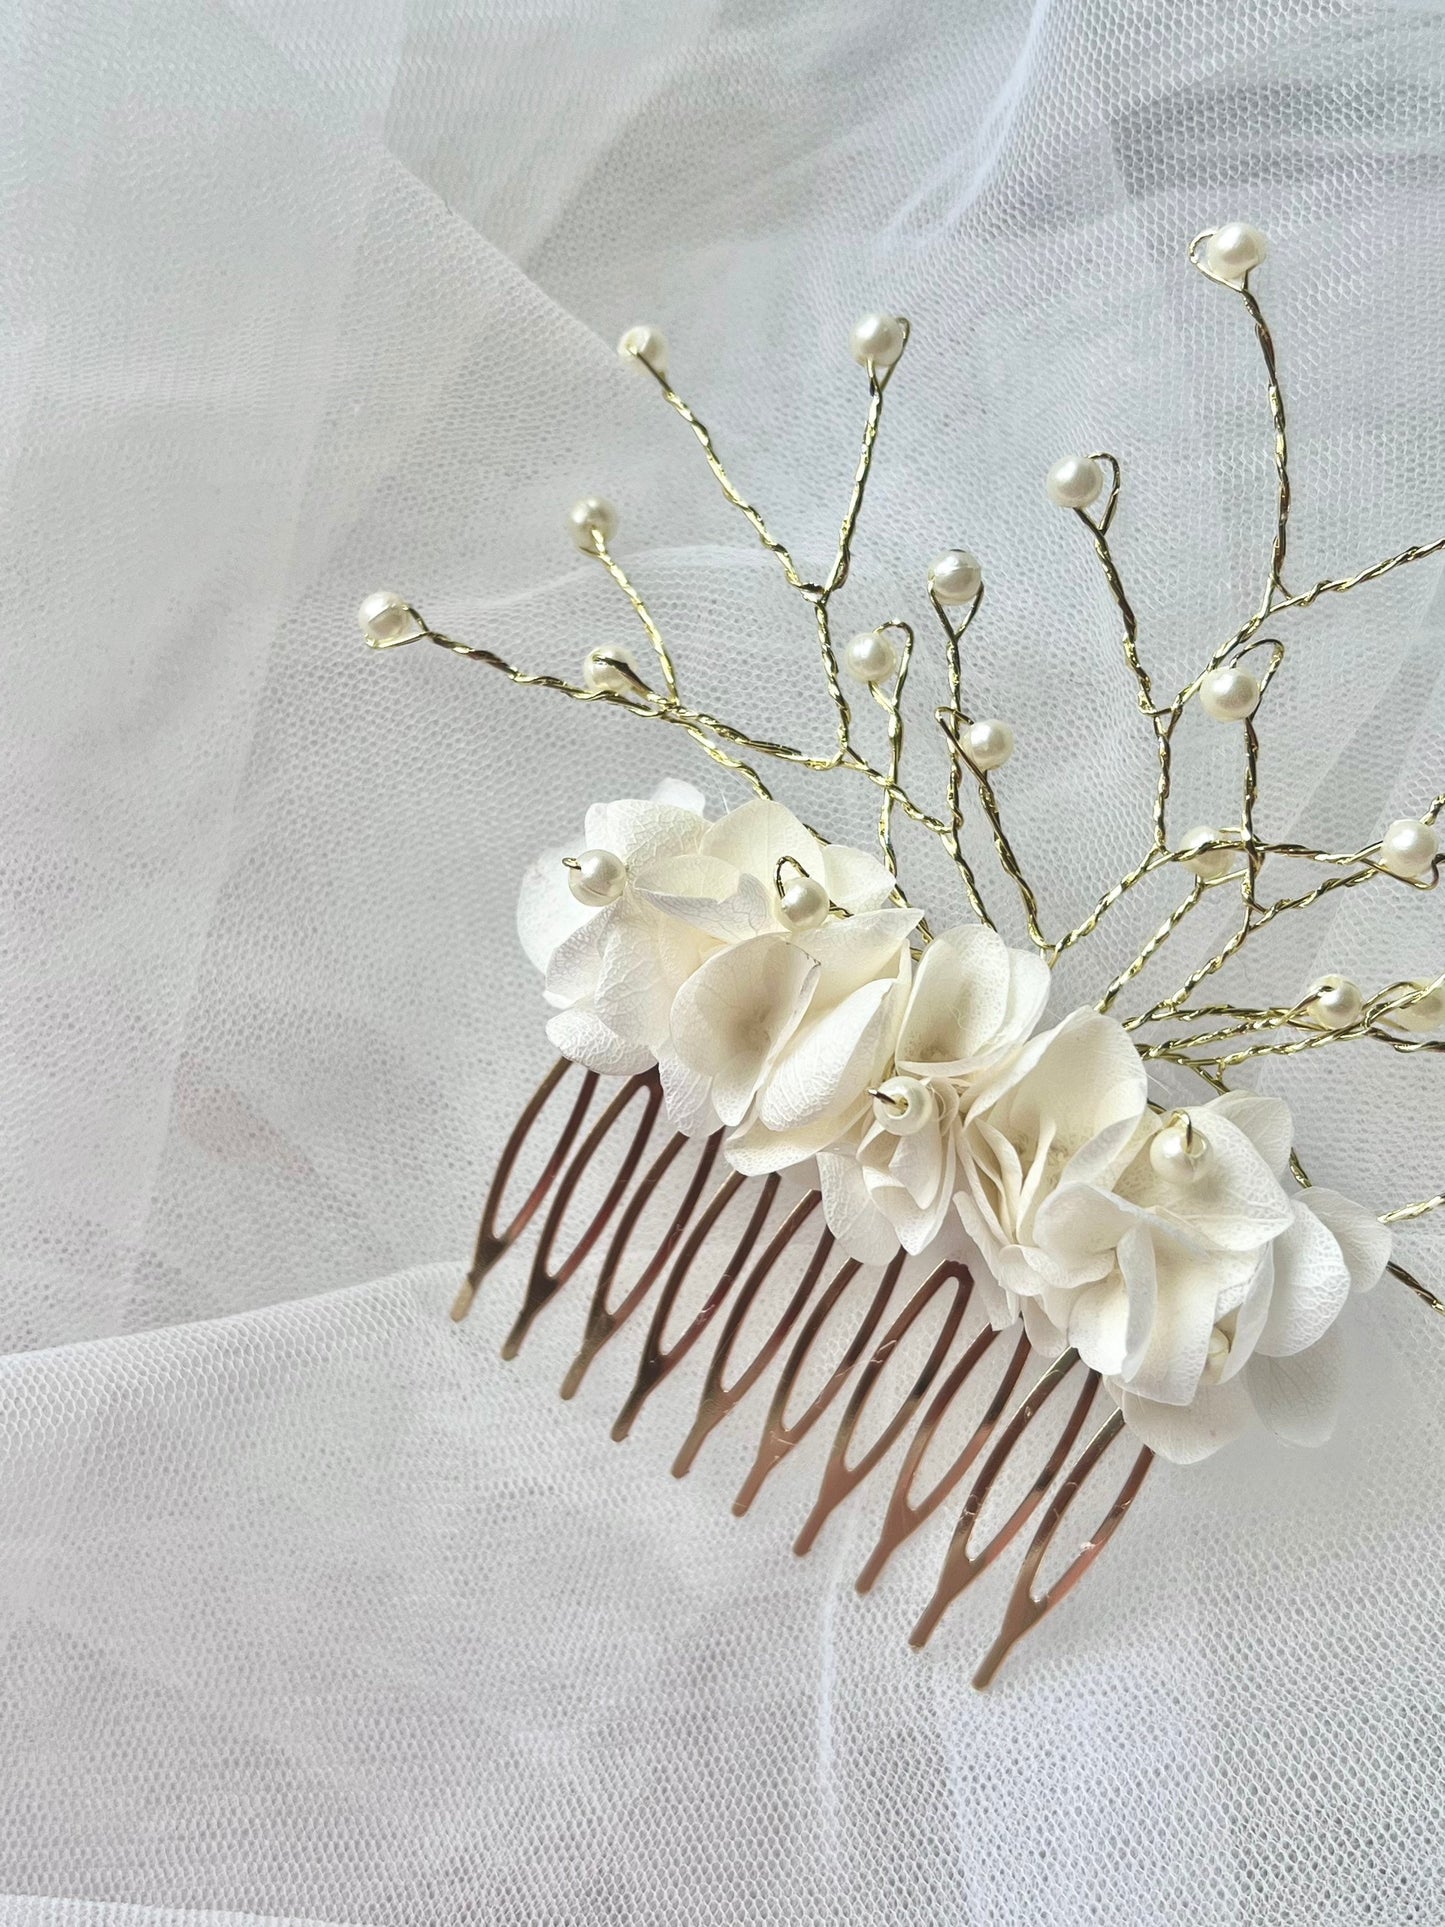 Boho Wedding Flower Hair Comb White and Gold Hair Accessories for Bride, Classic Ivory Flower Wedding Hair Piece Pearl